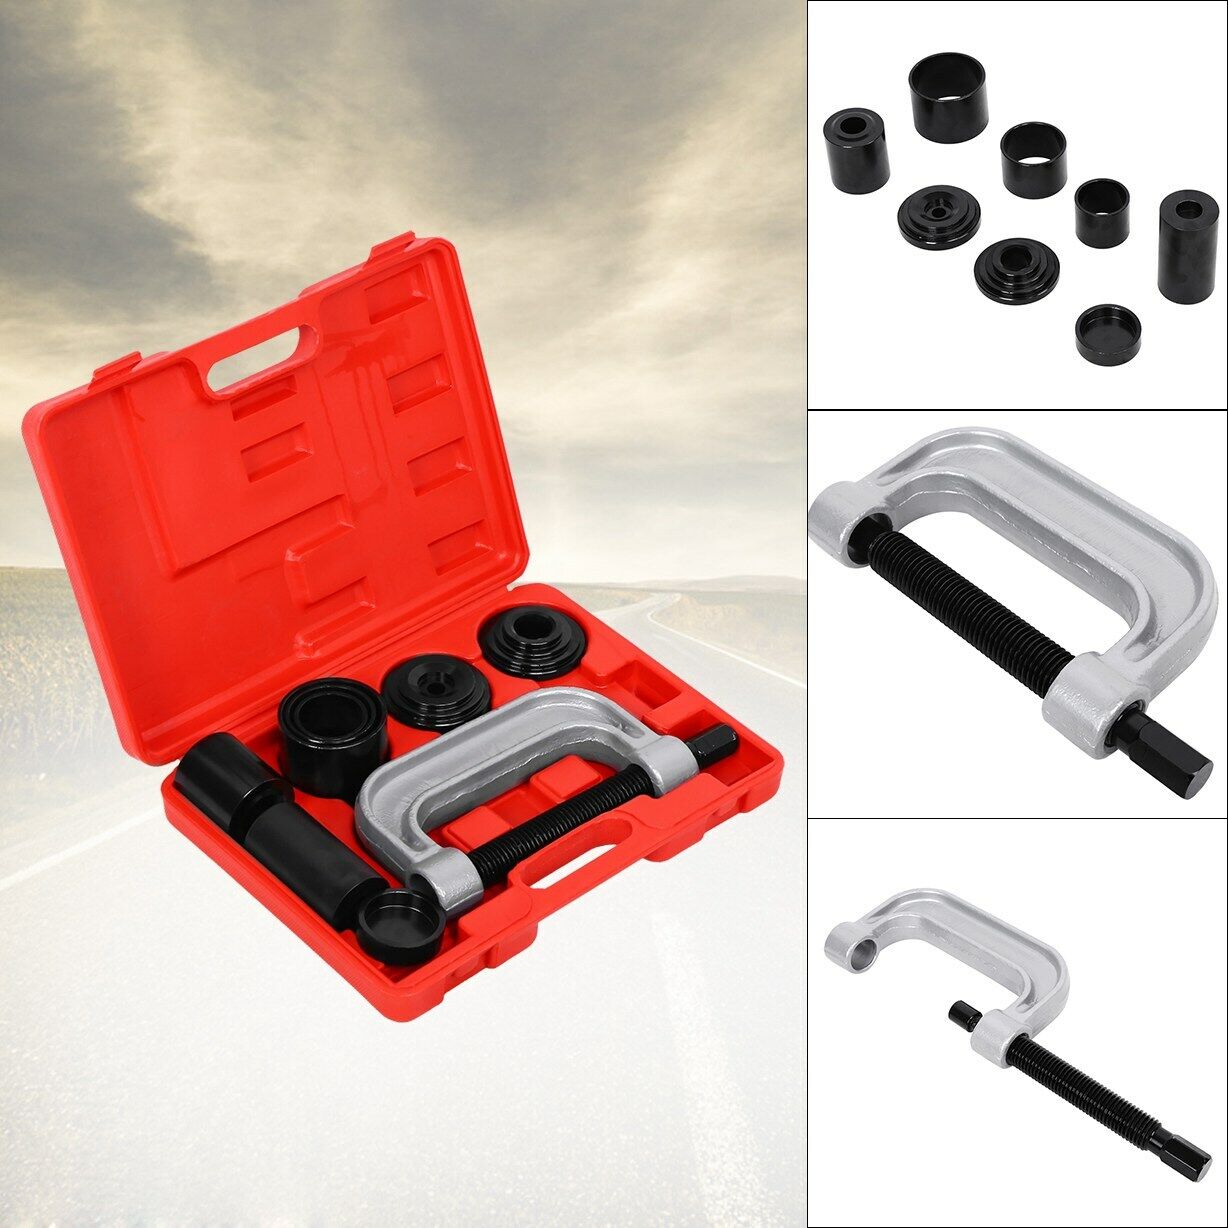 Stock Preferred 4 in 1 Ball Joint Press and U Joint Removal Tool Kit with 4x4 Adapters